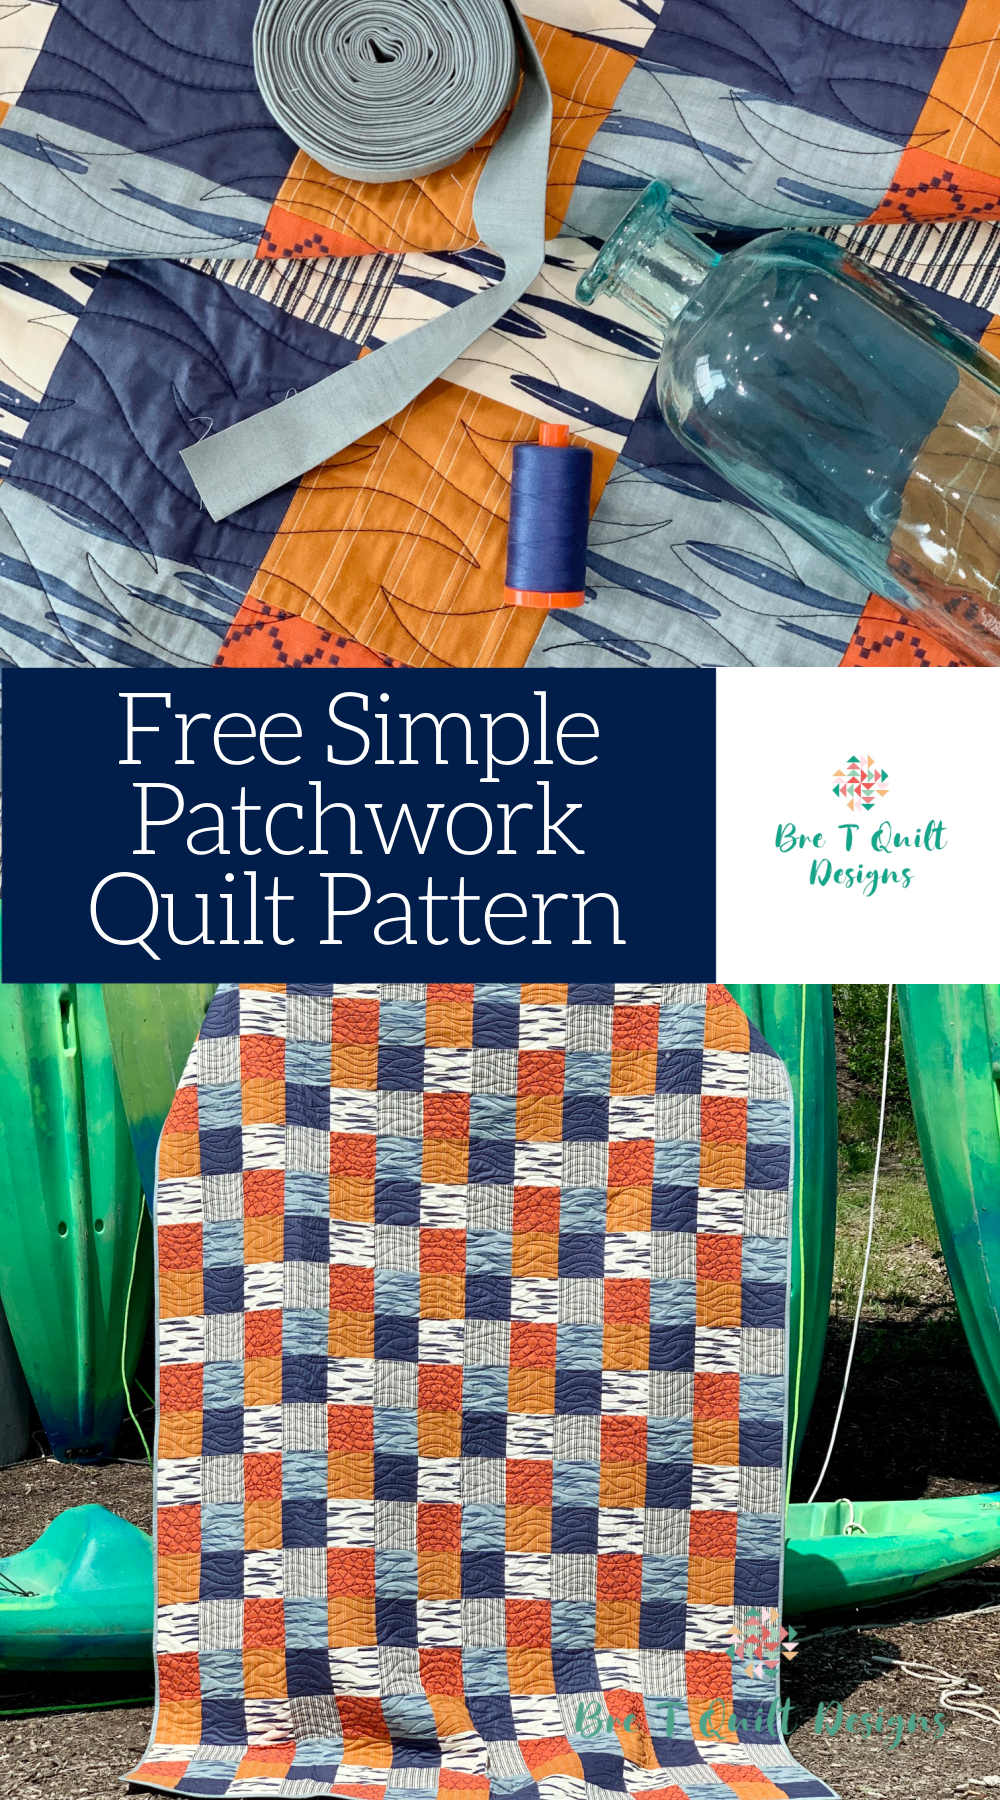 EASY PATCHWORK QUILT